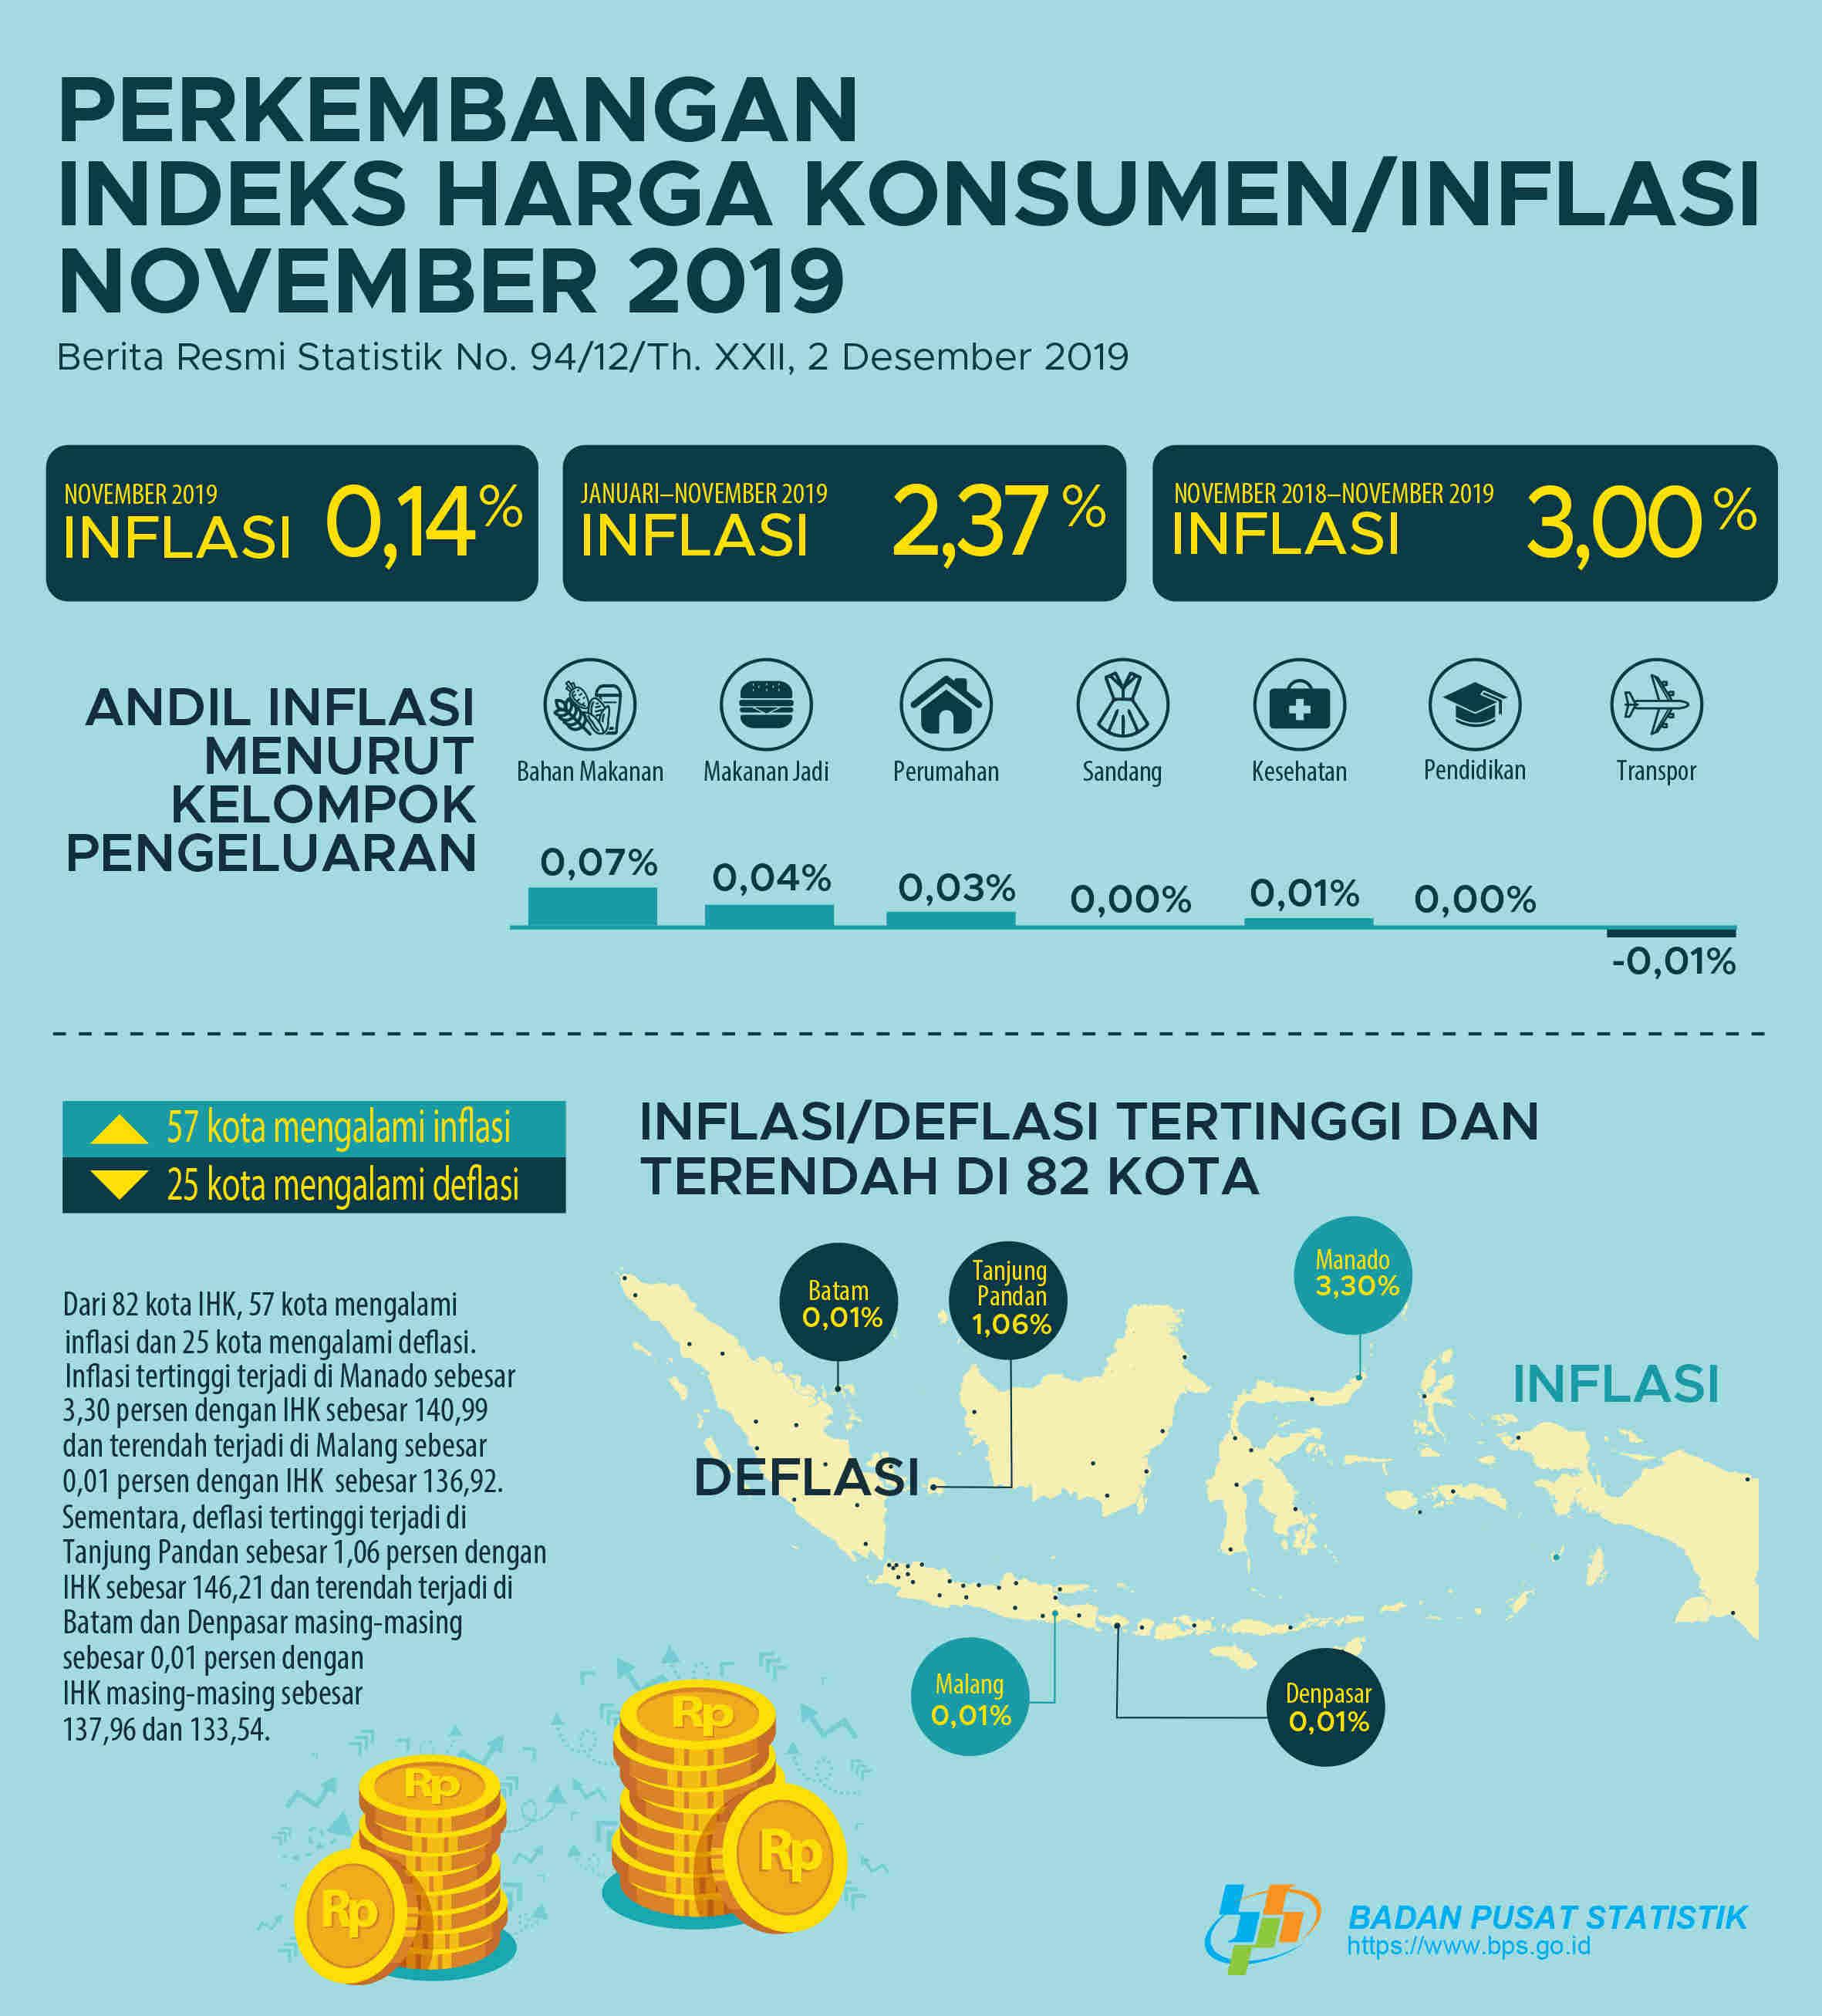 Inflation in November 2019 wa 0.14 percent. The highest inflation occured in Manado at 3.30 percent.